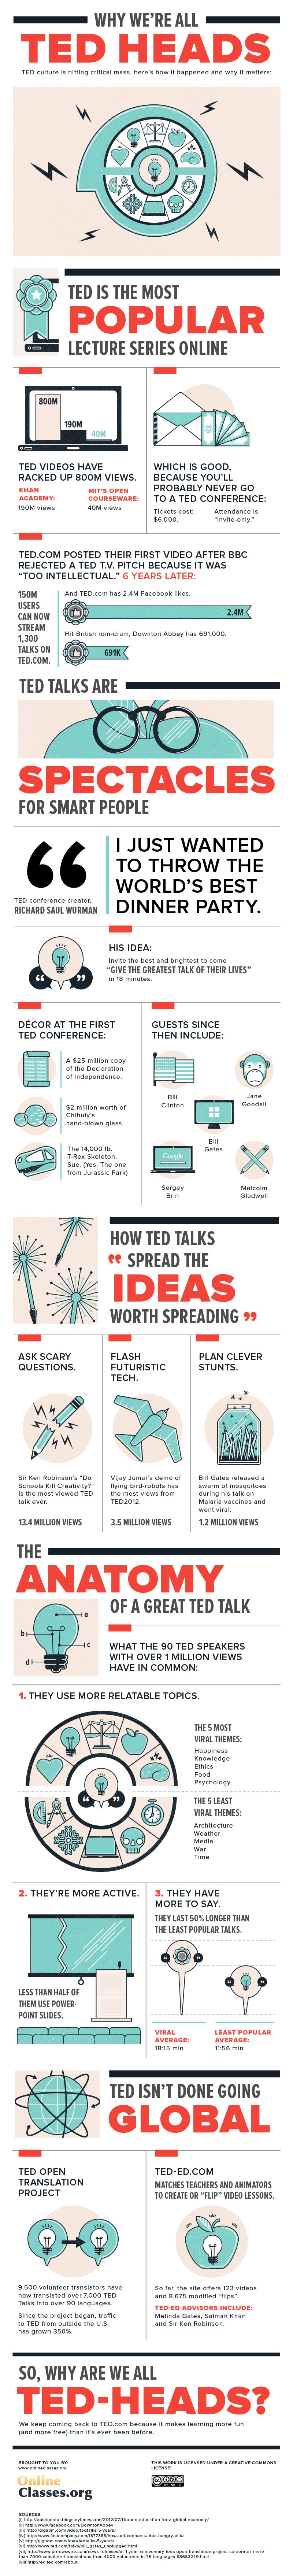 Why-TED-is-a-Great-Place-to-Learn-Online-Infographic